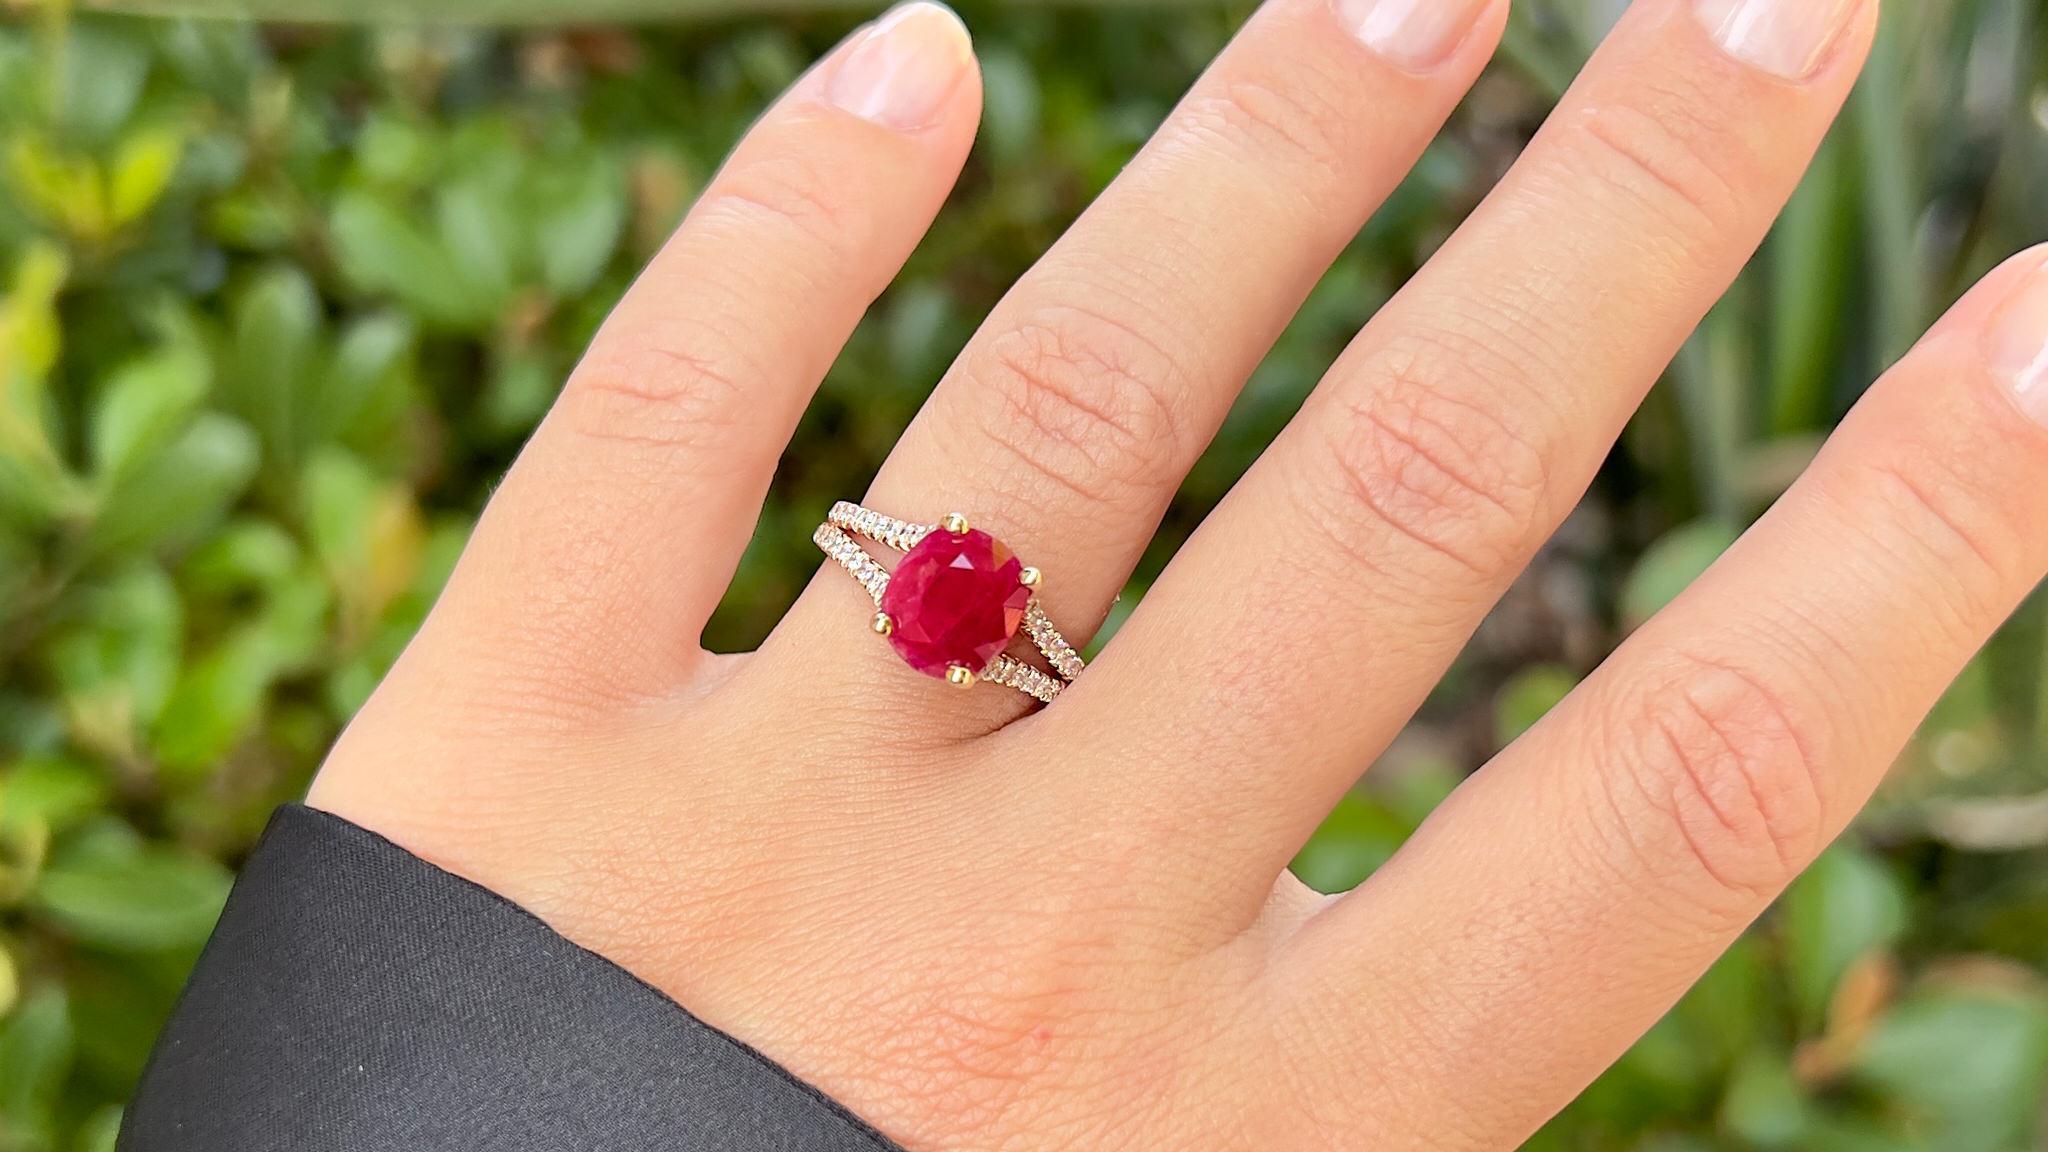 Rubies can command the highest per-carat price of any colored stone. This makes ruby one of the most important gems in the colored stone market.
It comes with the Original GIA Certificate
Natural Ruby from Burma
No Treatments, No Heat, Natural
Carat